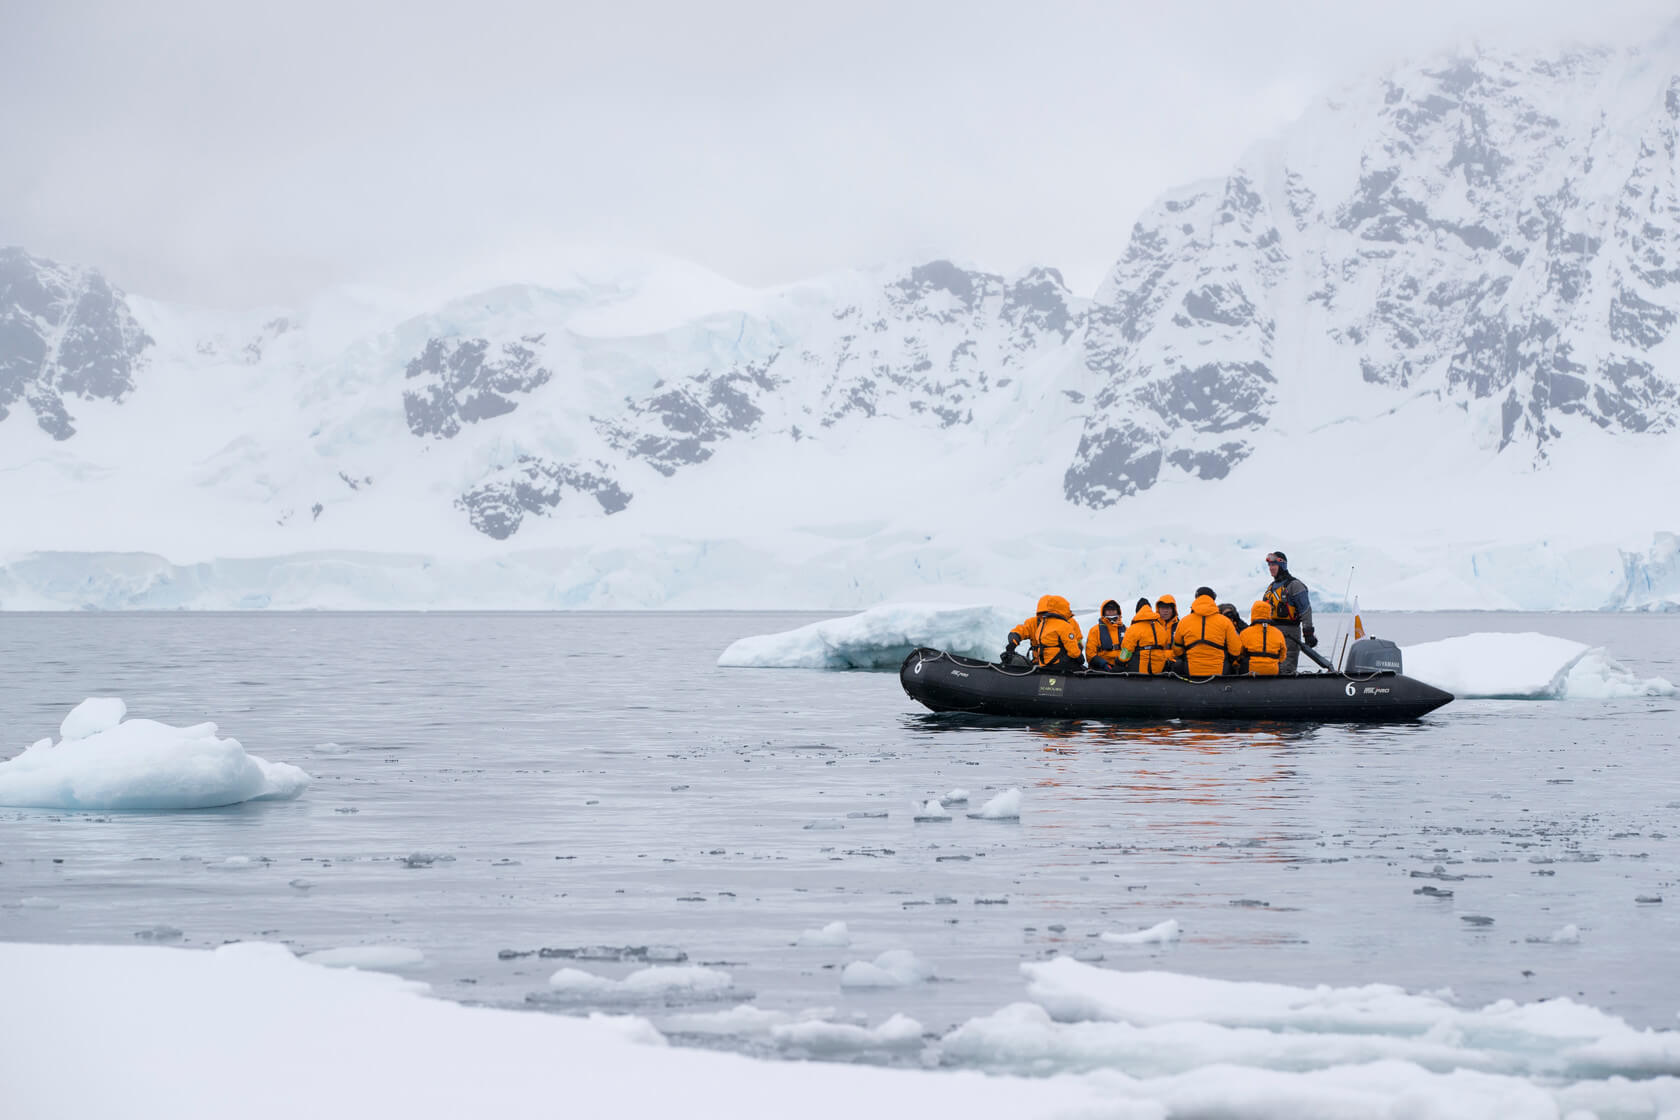 a group of people in a boat in the water with snow covered mountains